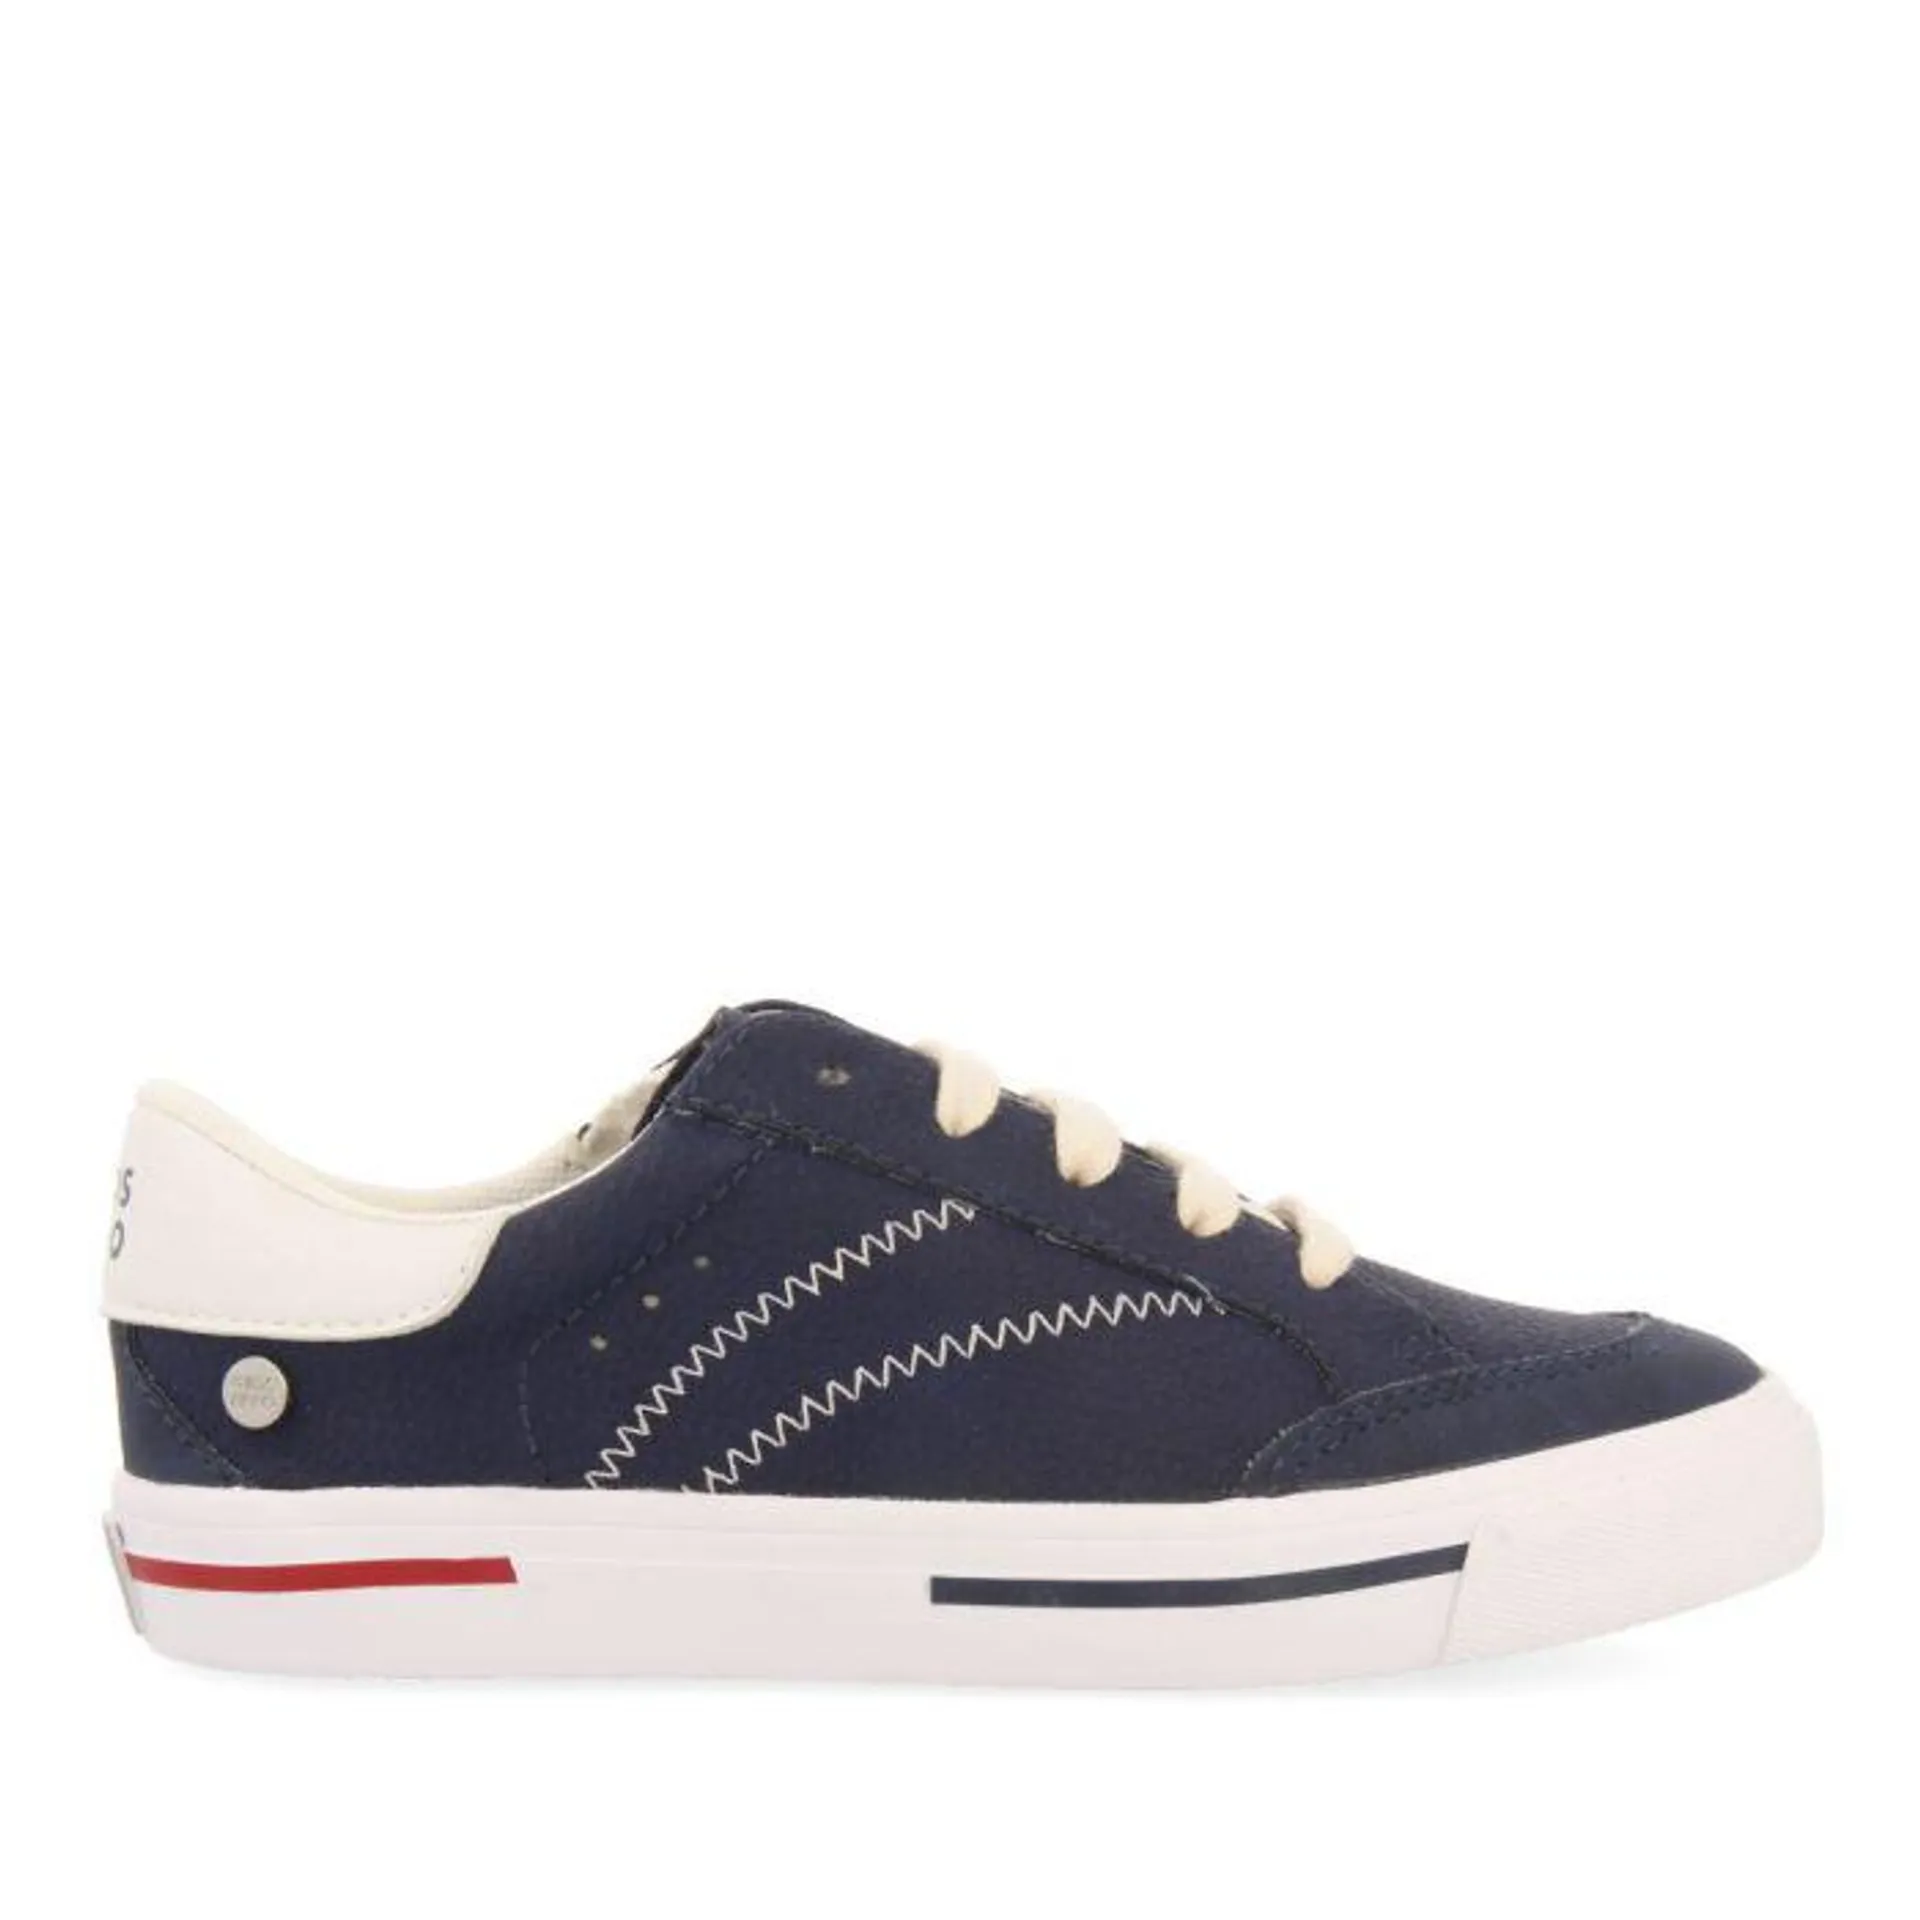 Favaios boys navy blue sneakers with white details